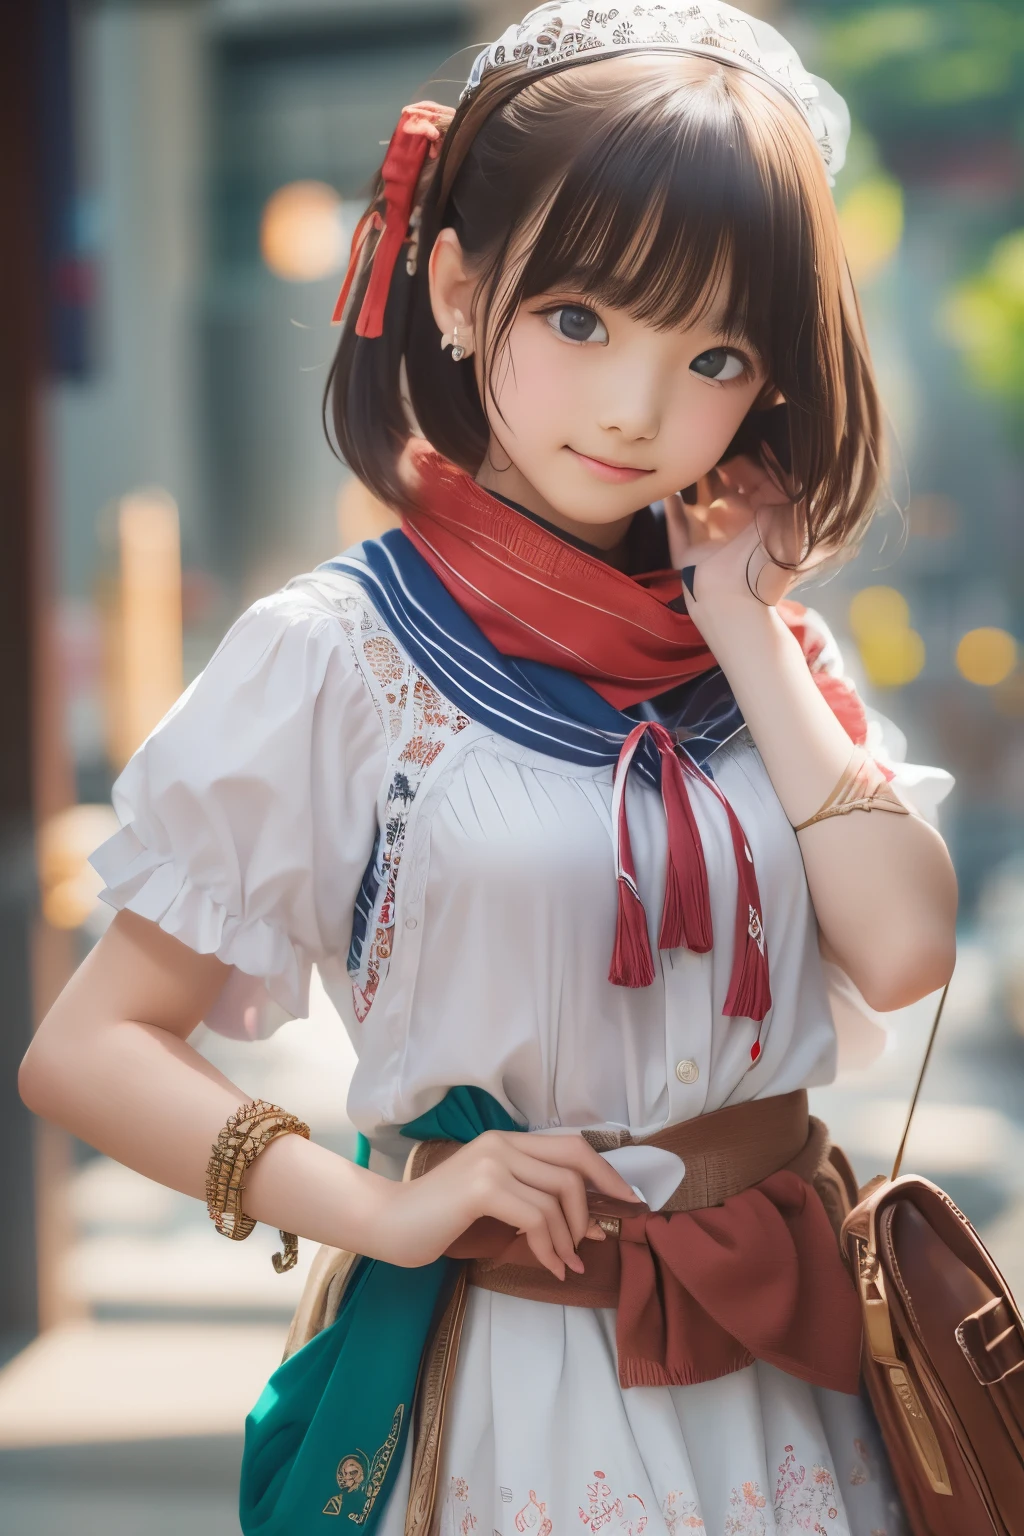 ((sfw: 1.4)), (sfw,She is wearing a long white embroidered skirt, a red blouse with lace, a white apron tied around her waist, blue socks, and brown leather shoes.A blue scarf is on her head. Yes, her accessories include necklaces, earrings, and bracelets. 1 Girl)), Ultra High Resolution, (Realistic: 1.4), RAW Photo, Best Quality, (Photorealistic Stick), Focus, Soft Light, ((15 years old)),  ((Japanese)), (( (young face))), (surface), (depth of field), masterpiece, (realistic), woman, bangs, ((1 girl))